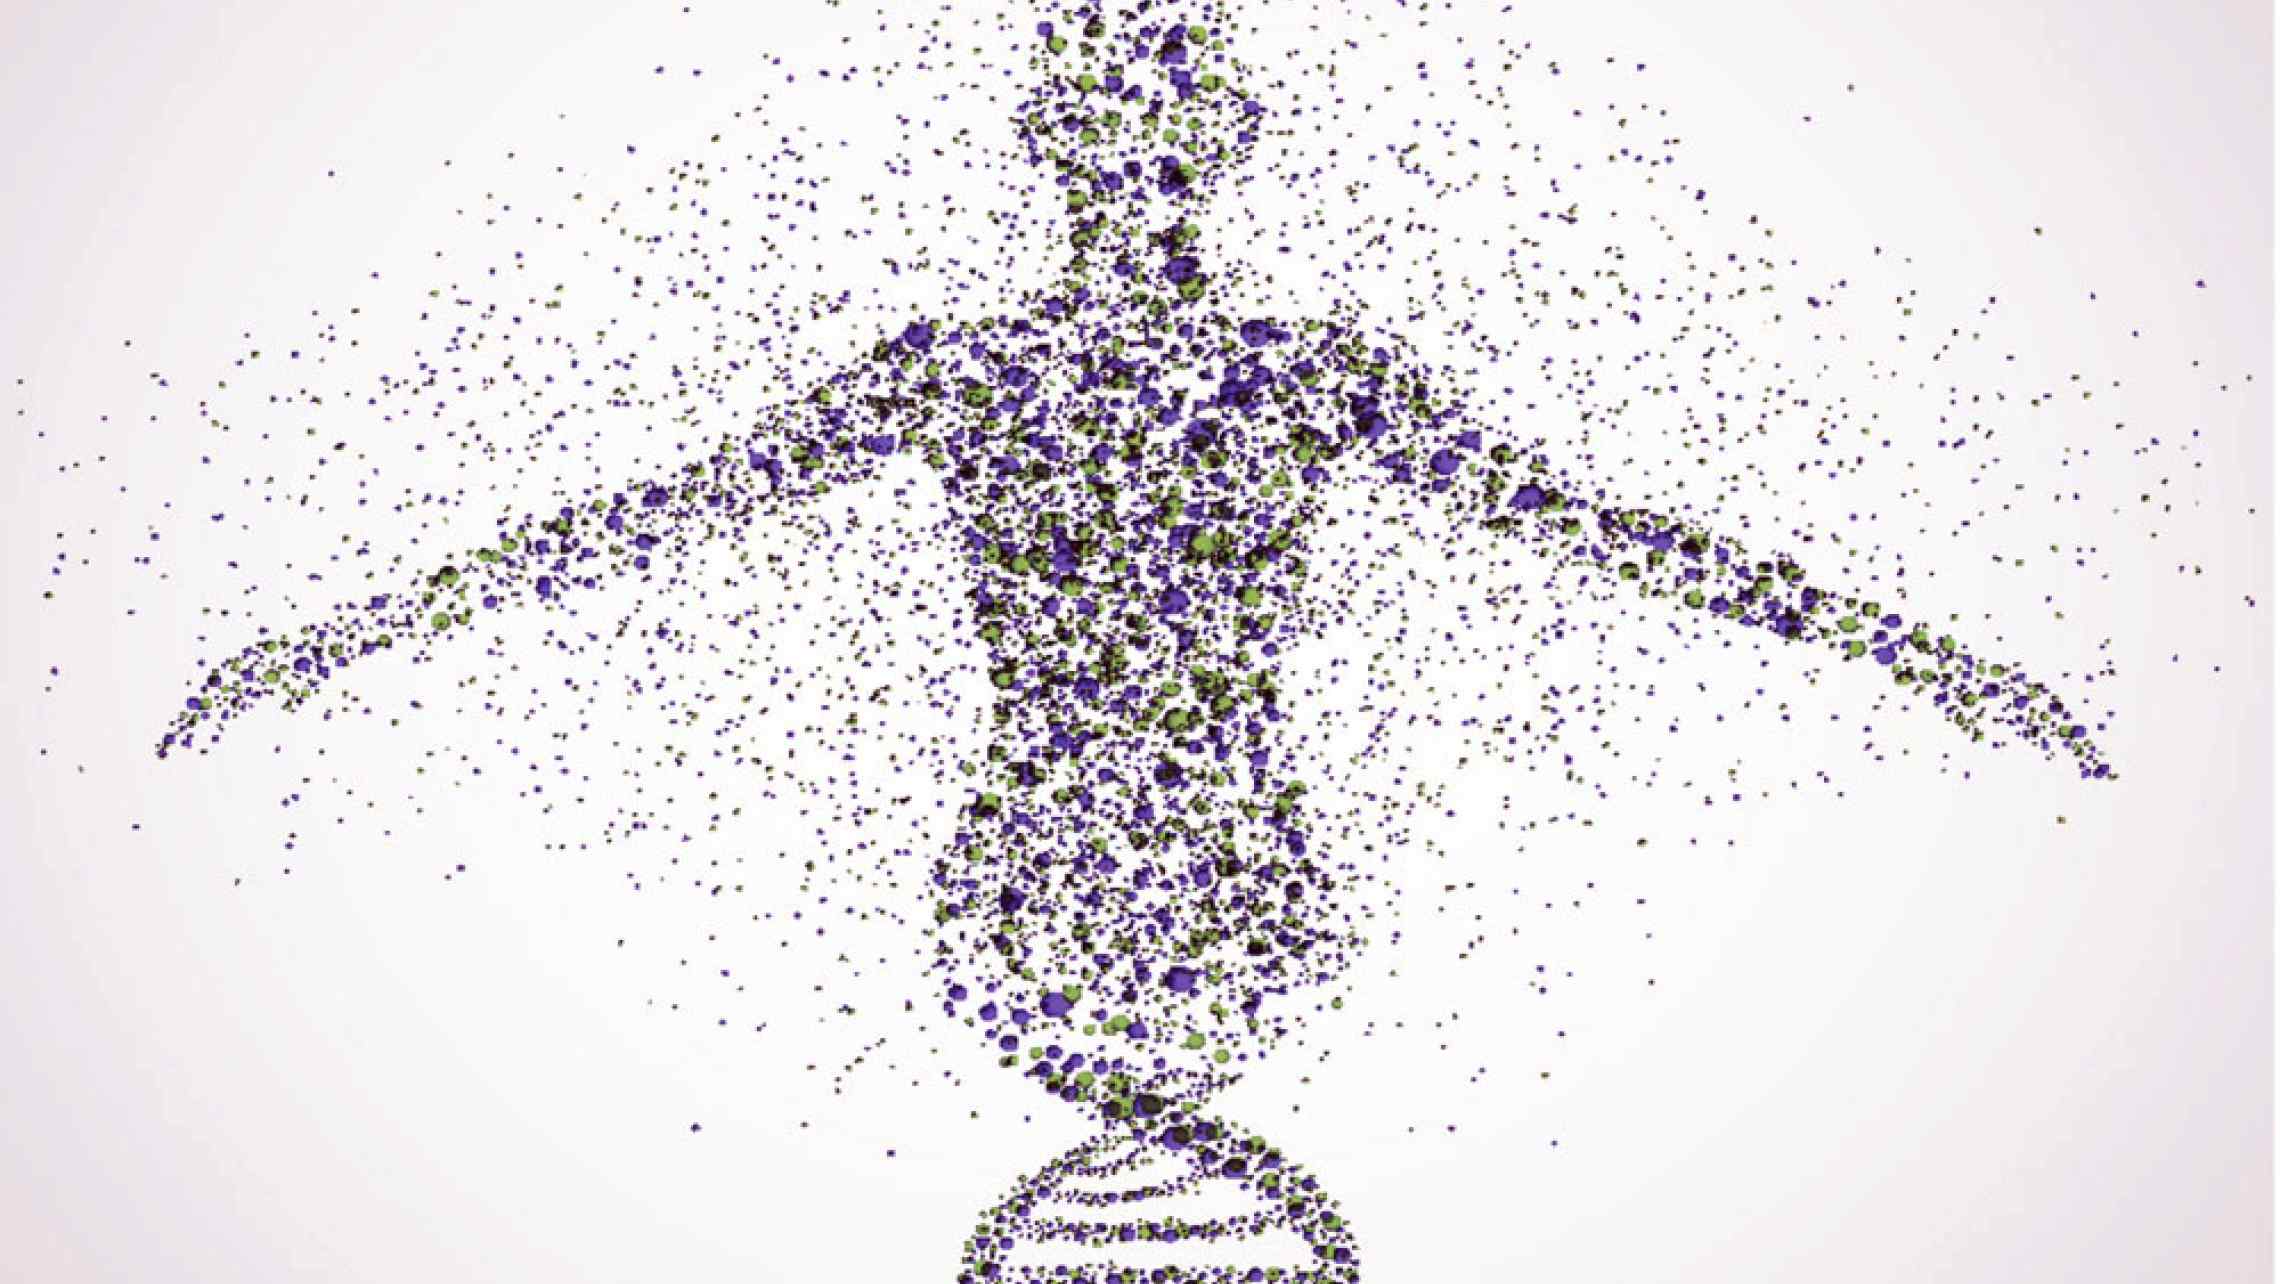 GENETICISTS ARE PIONEERING A WAY TO POSTPONE DEATH USING HUMAN DNA